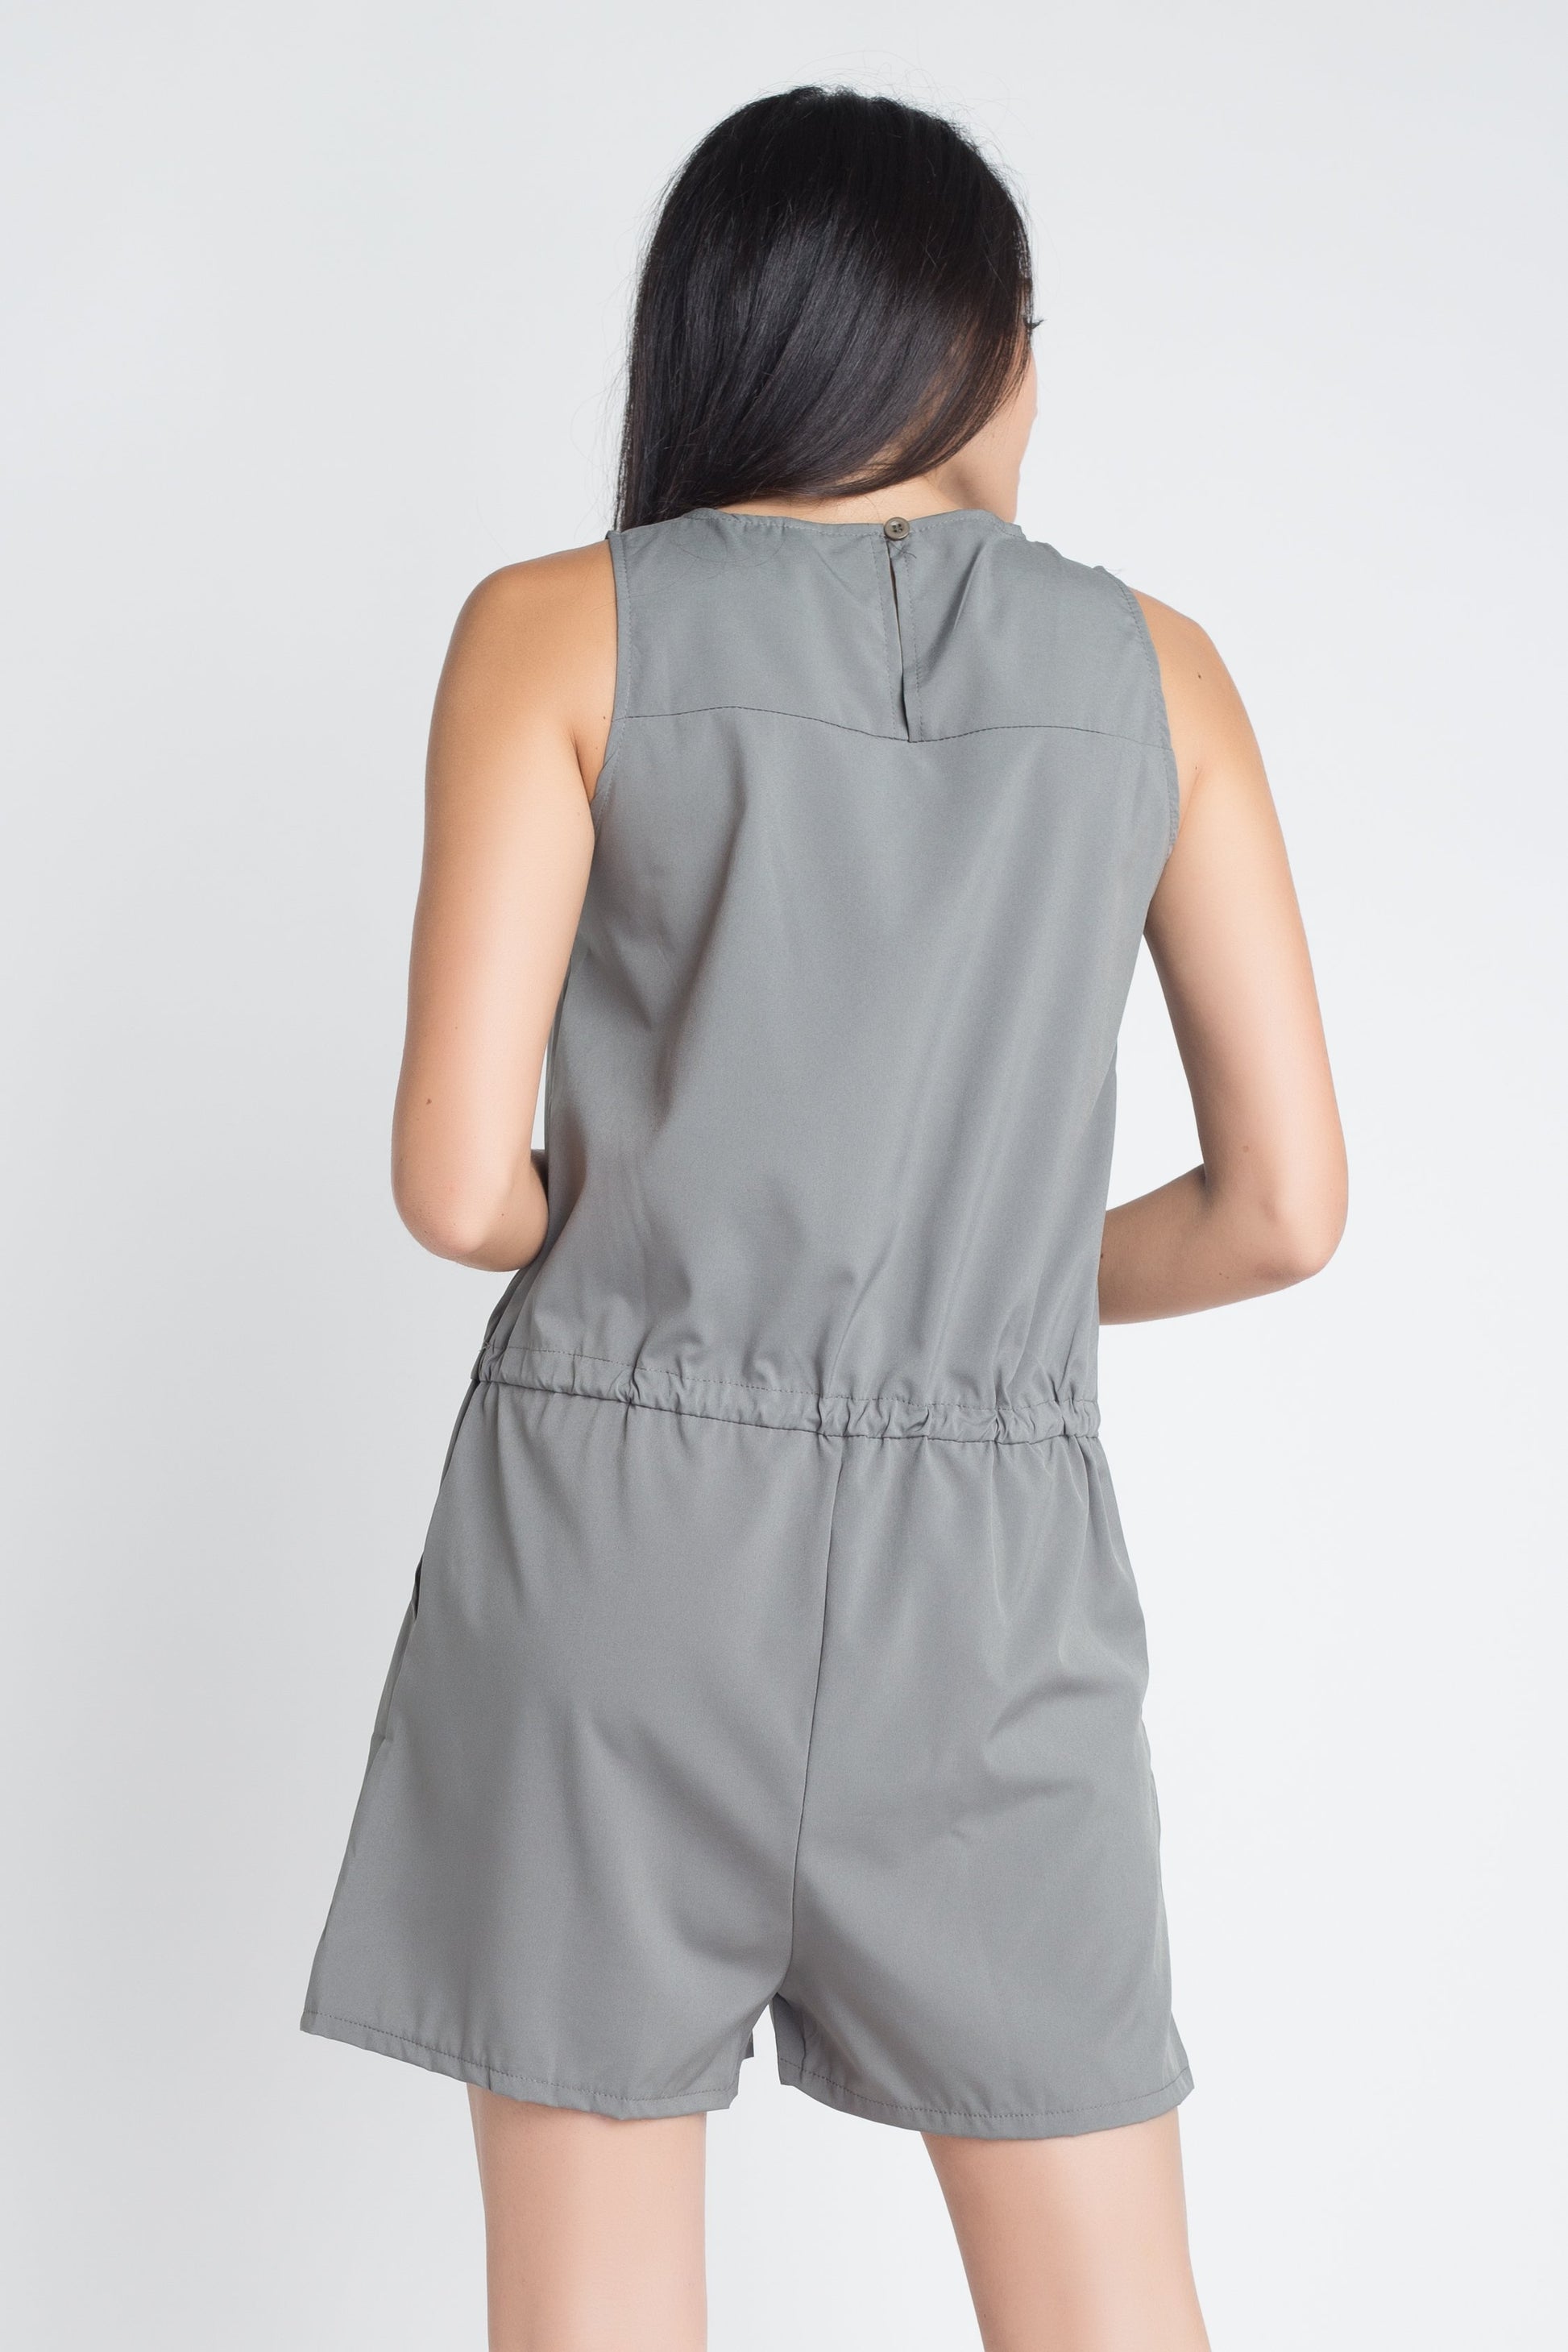 Zip Front Sleeveless Rompers: Sleeveless one-piece outfits with a front zipper closure, offering both style and convenience.